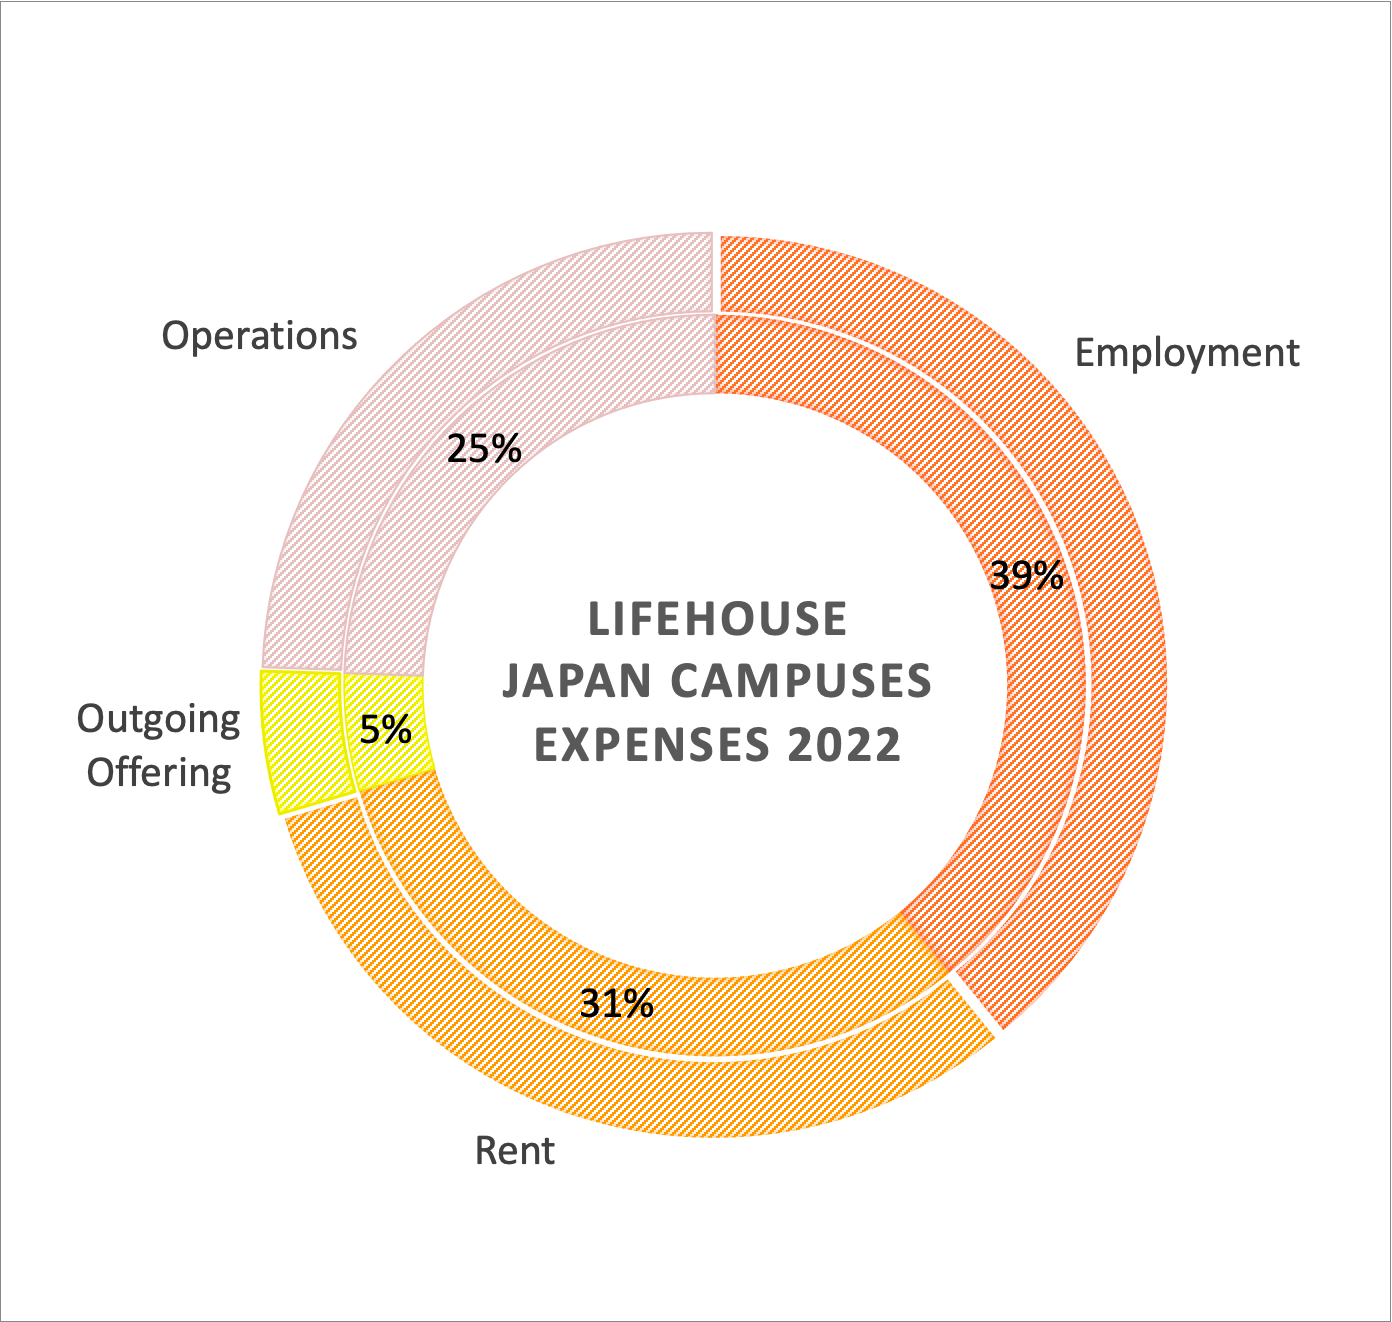 Lifehouse Japan Campuses Expenses 2022